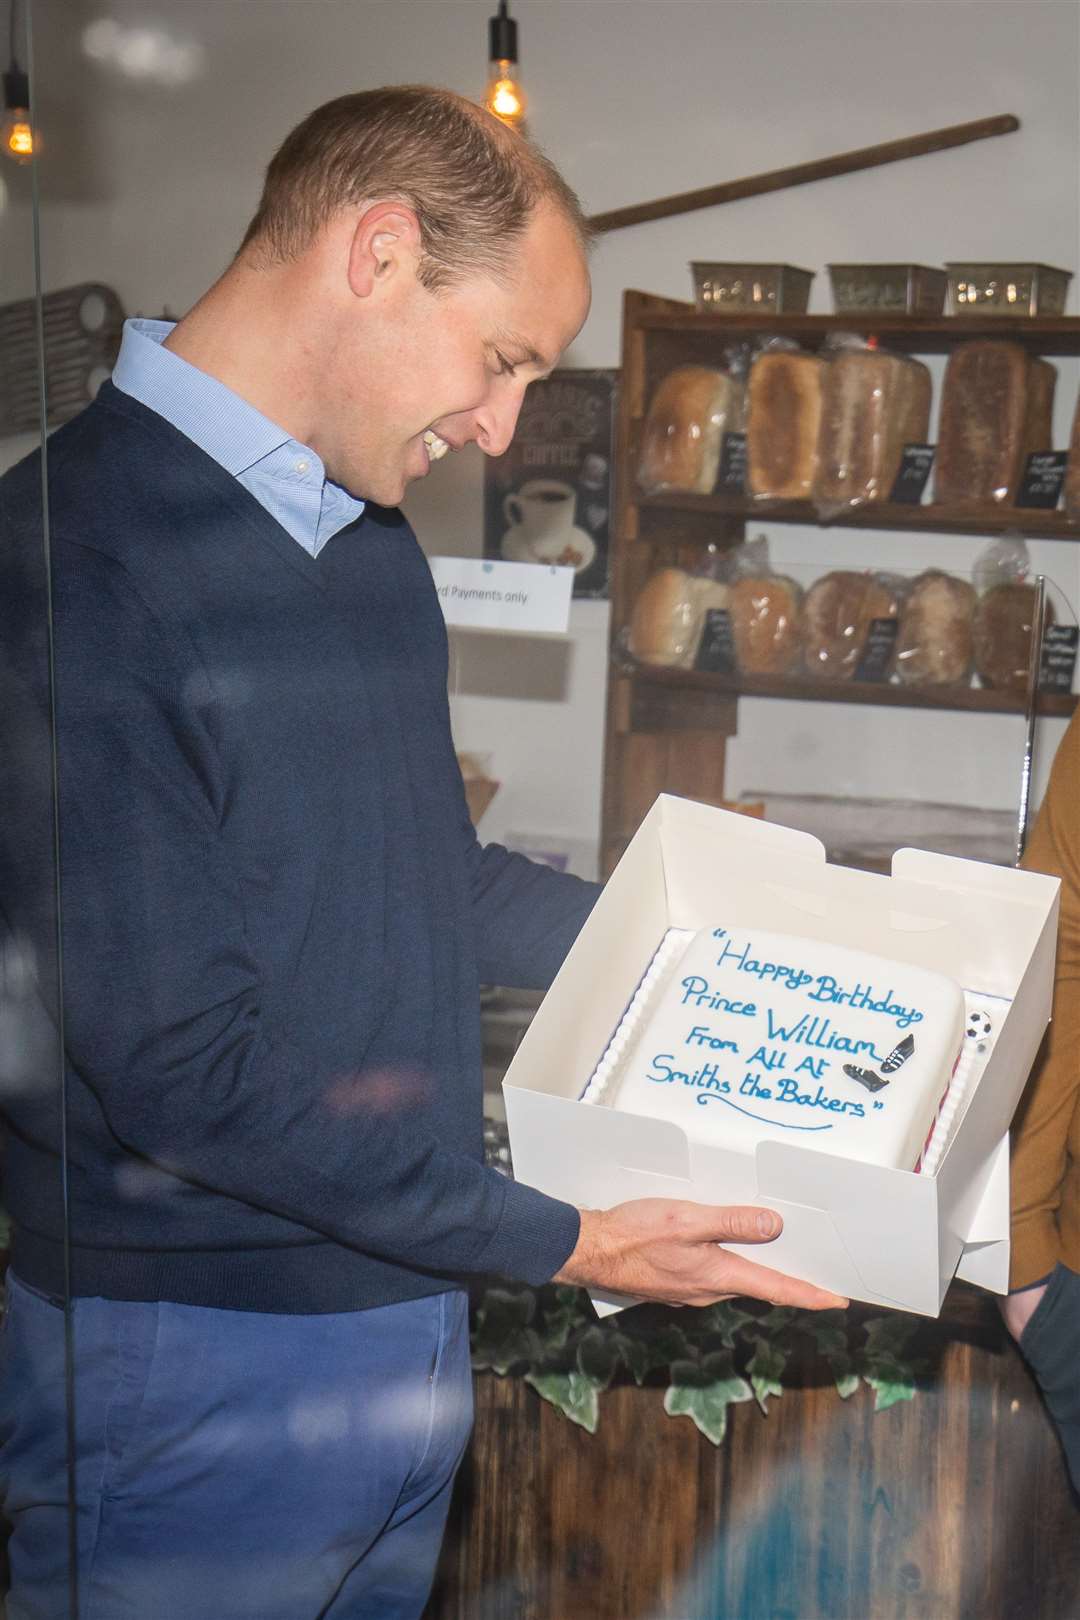 The duke was given a cake ahead of his 38th birthday on Sunday (Aaron Chown/PA)